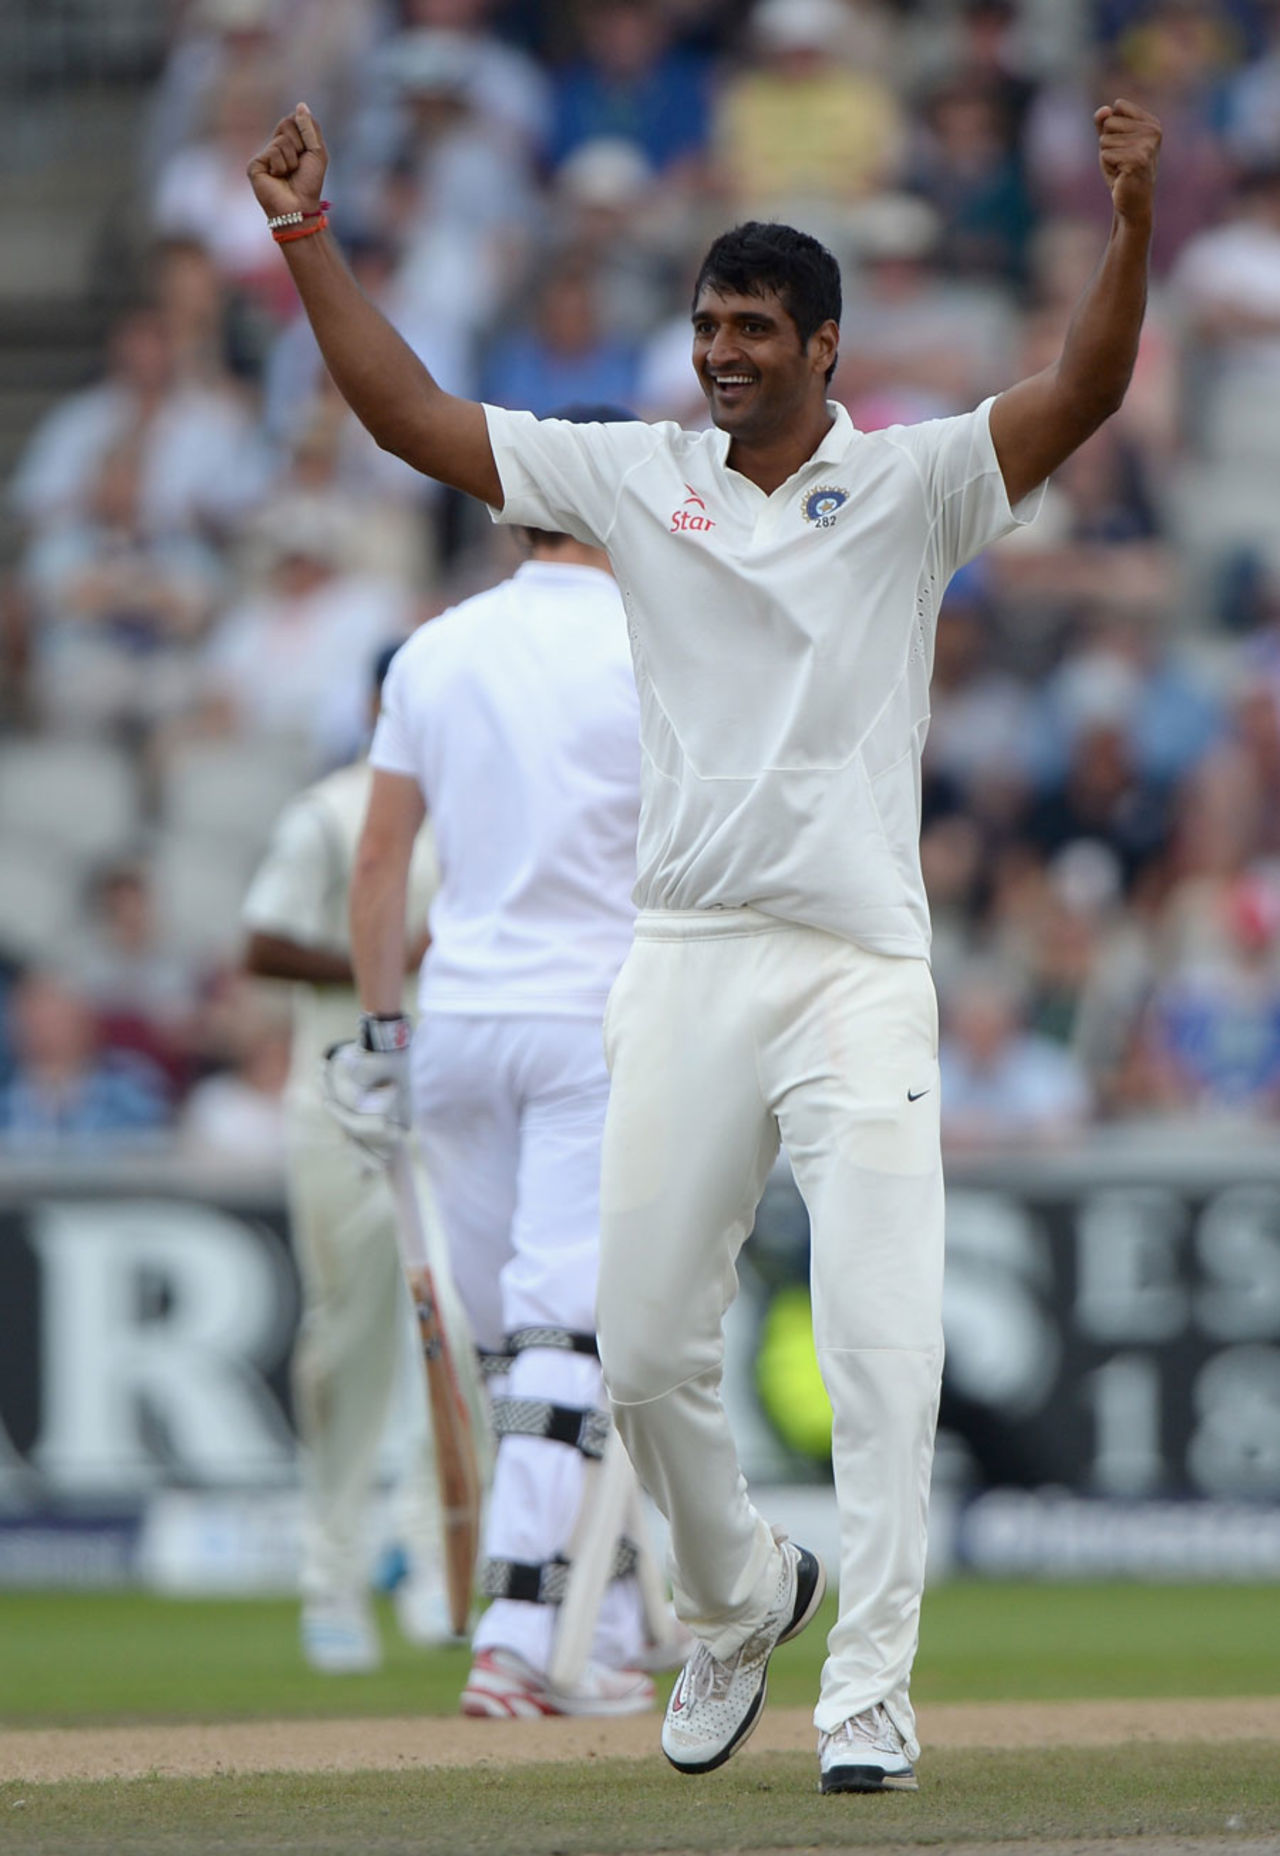 Pankaj Singh was rewarded for his toil with two quick wickets, England v India, 4th Test, Old Trafford, 3rd day, August 9, 2014